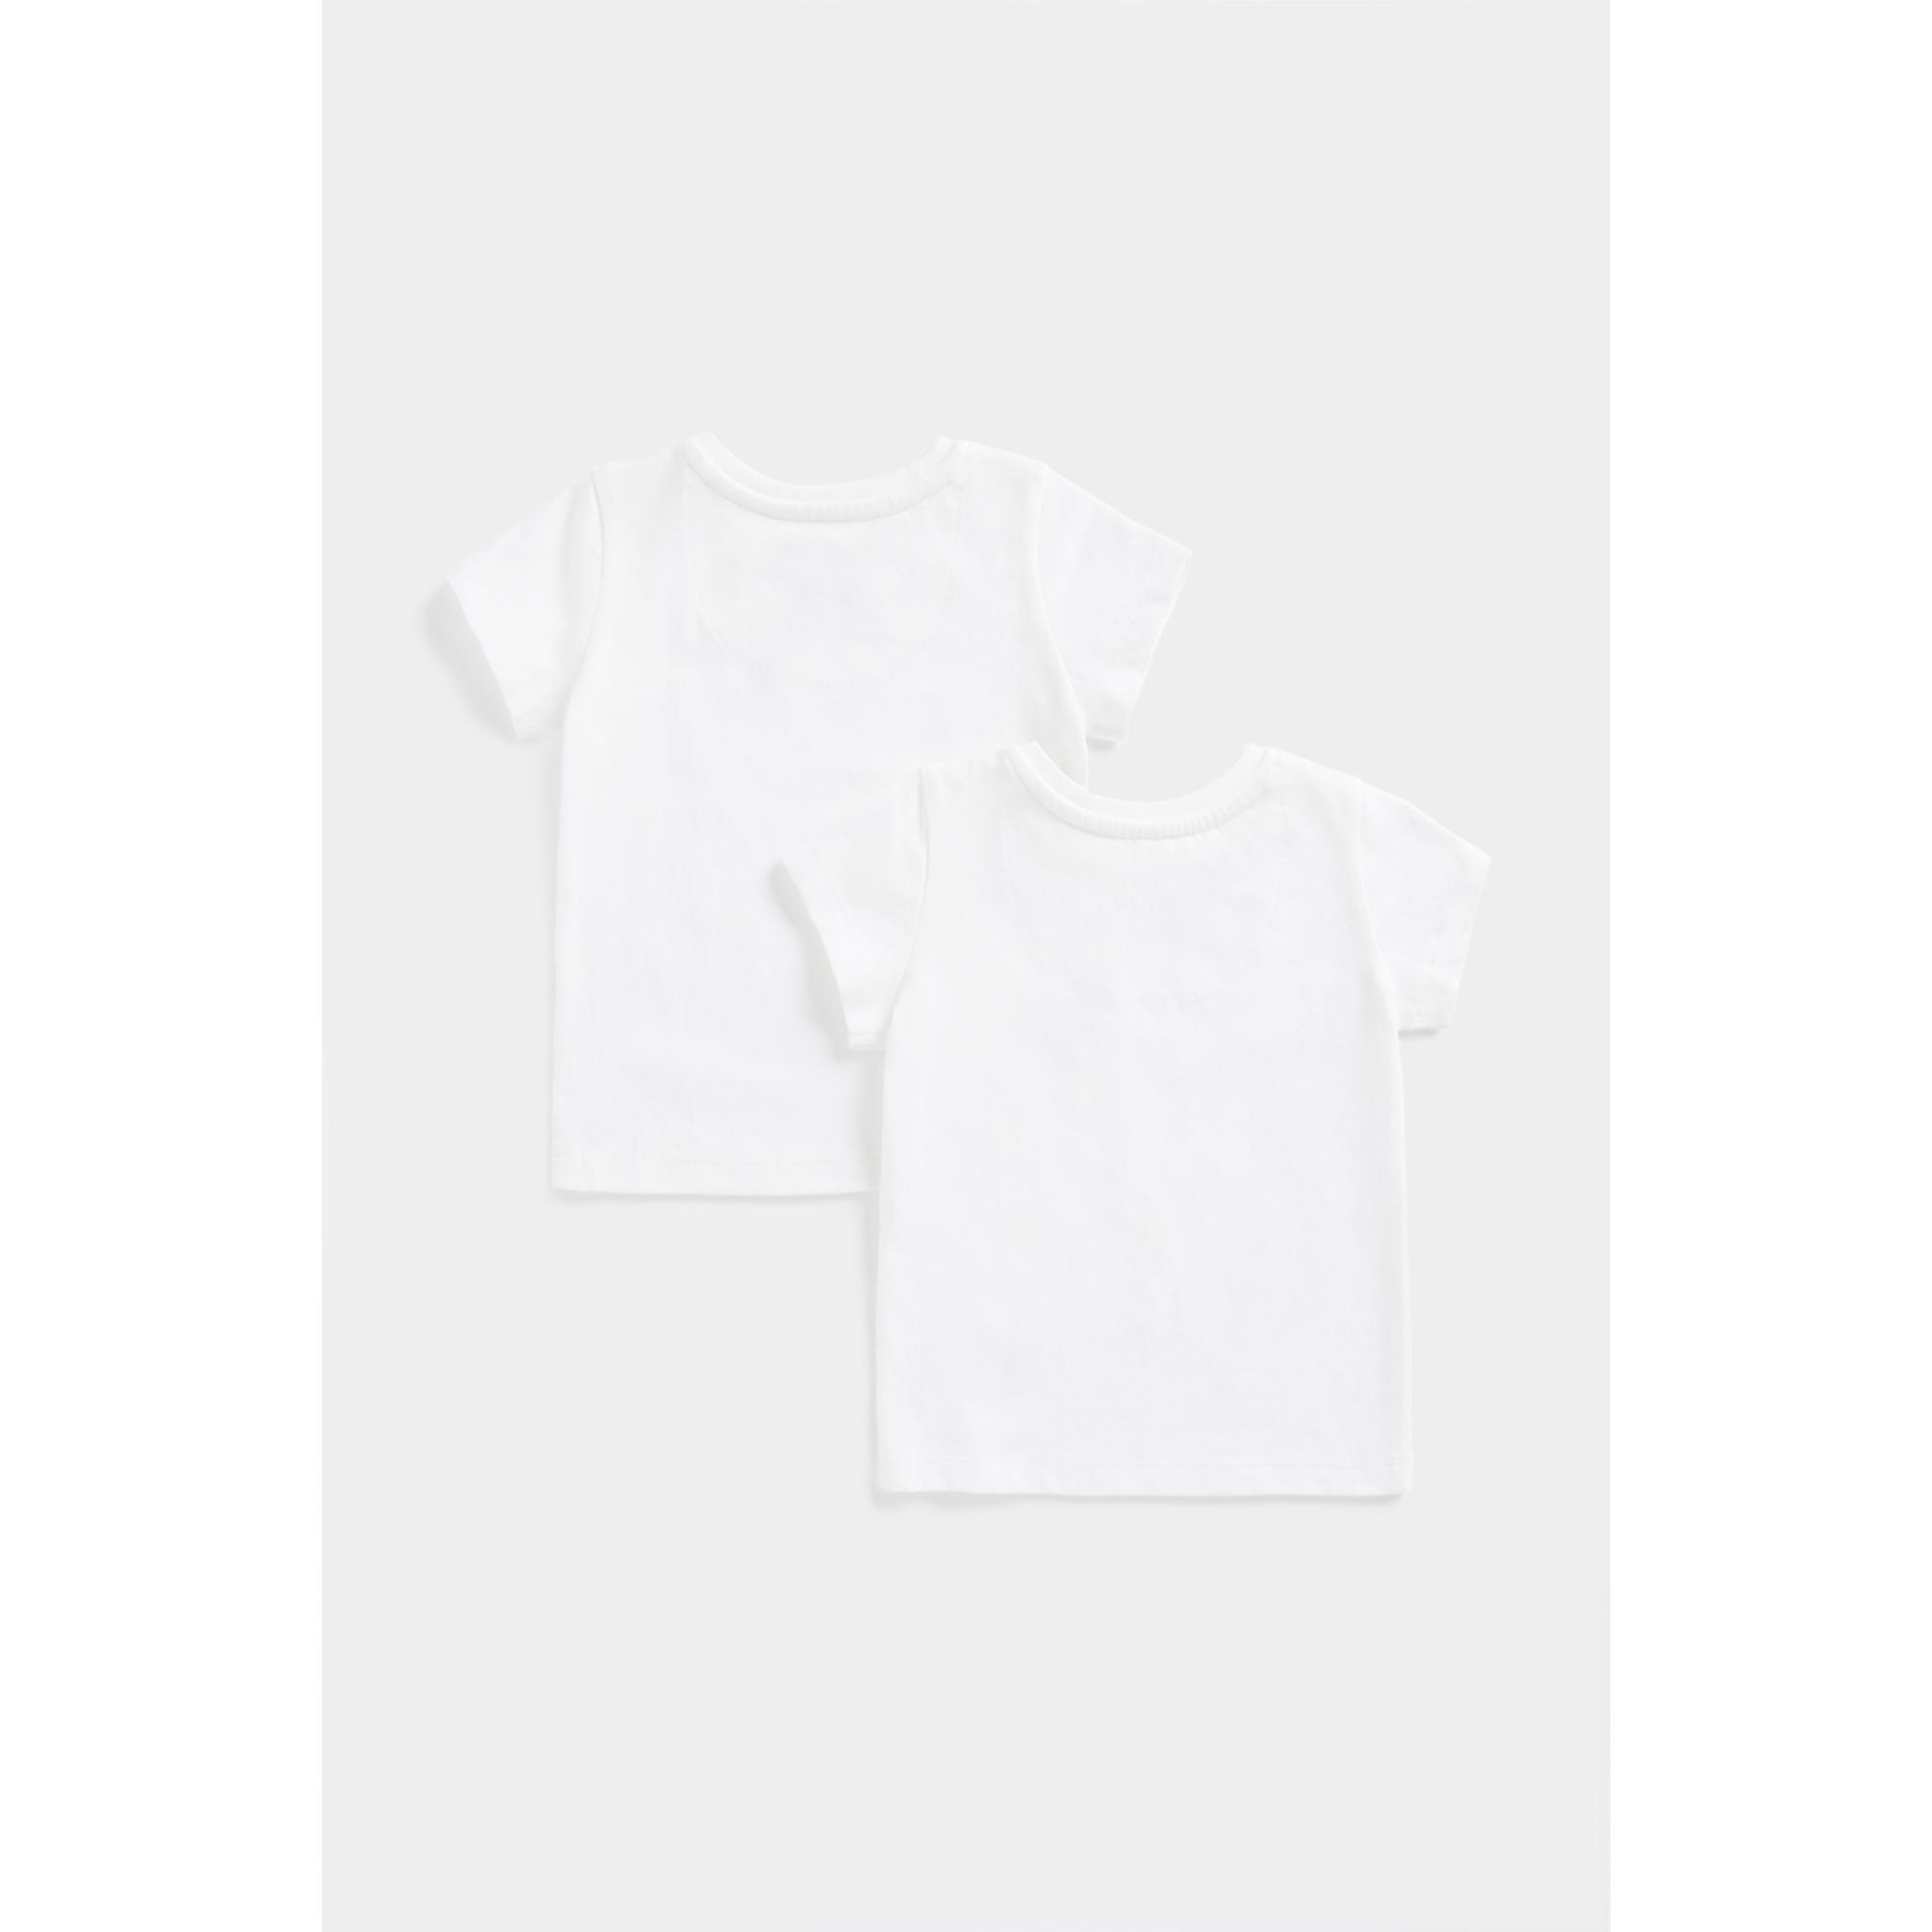 Mothercare White T-Shirts - 2 Pack